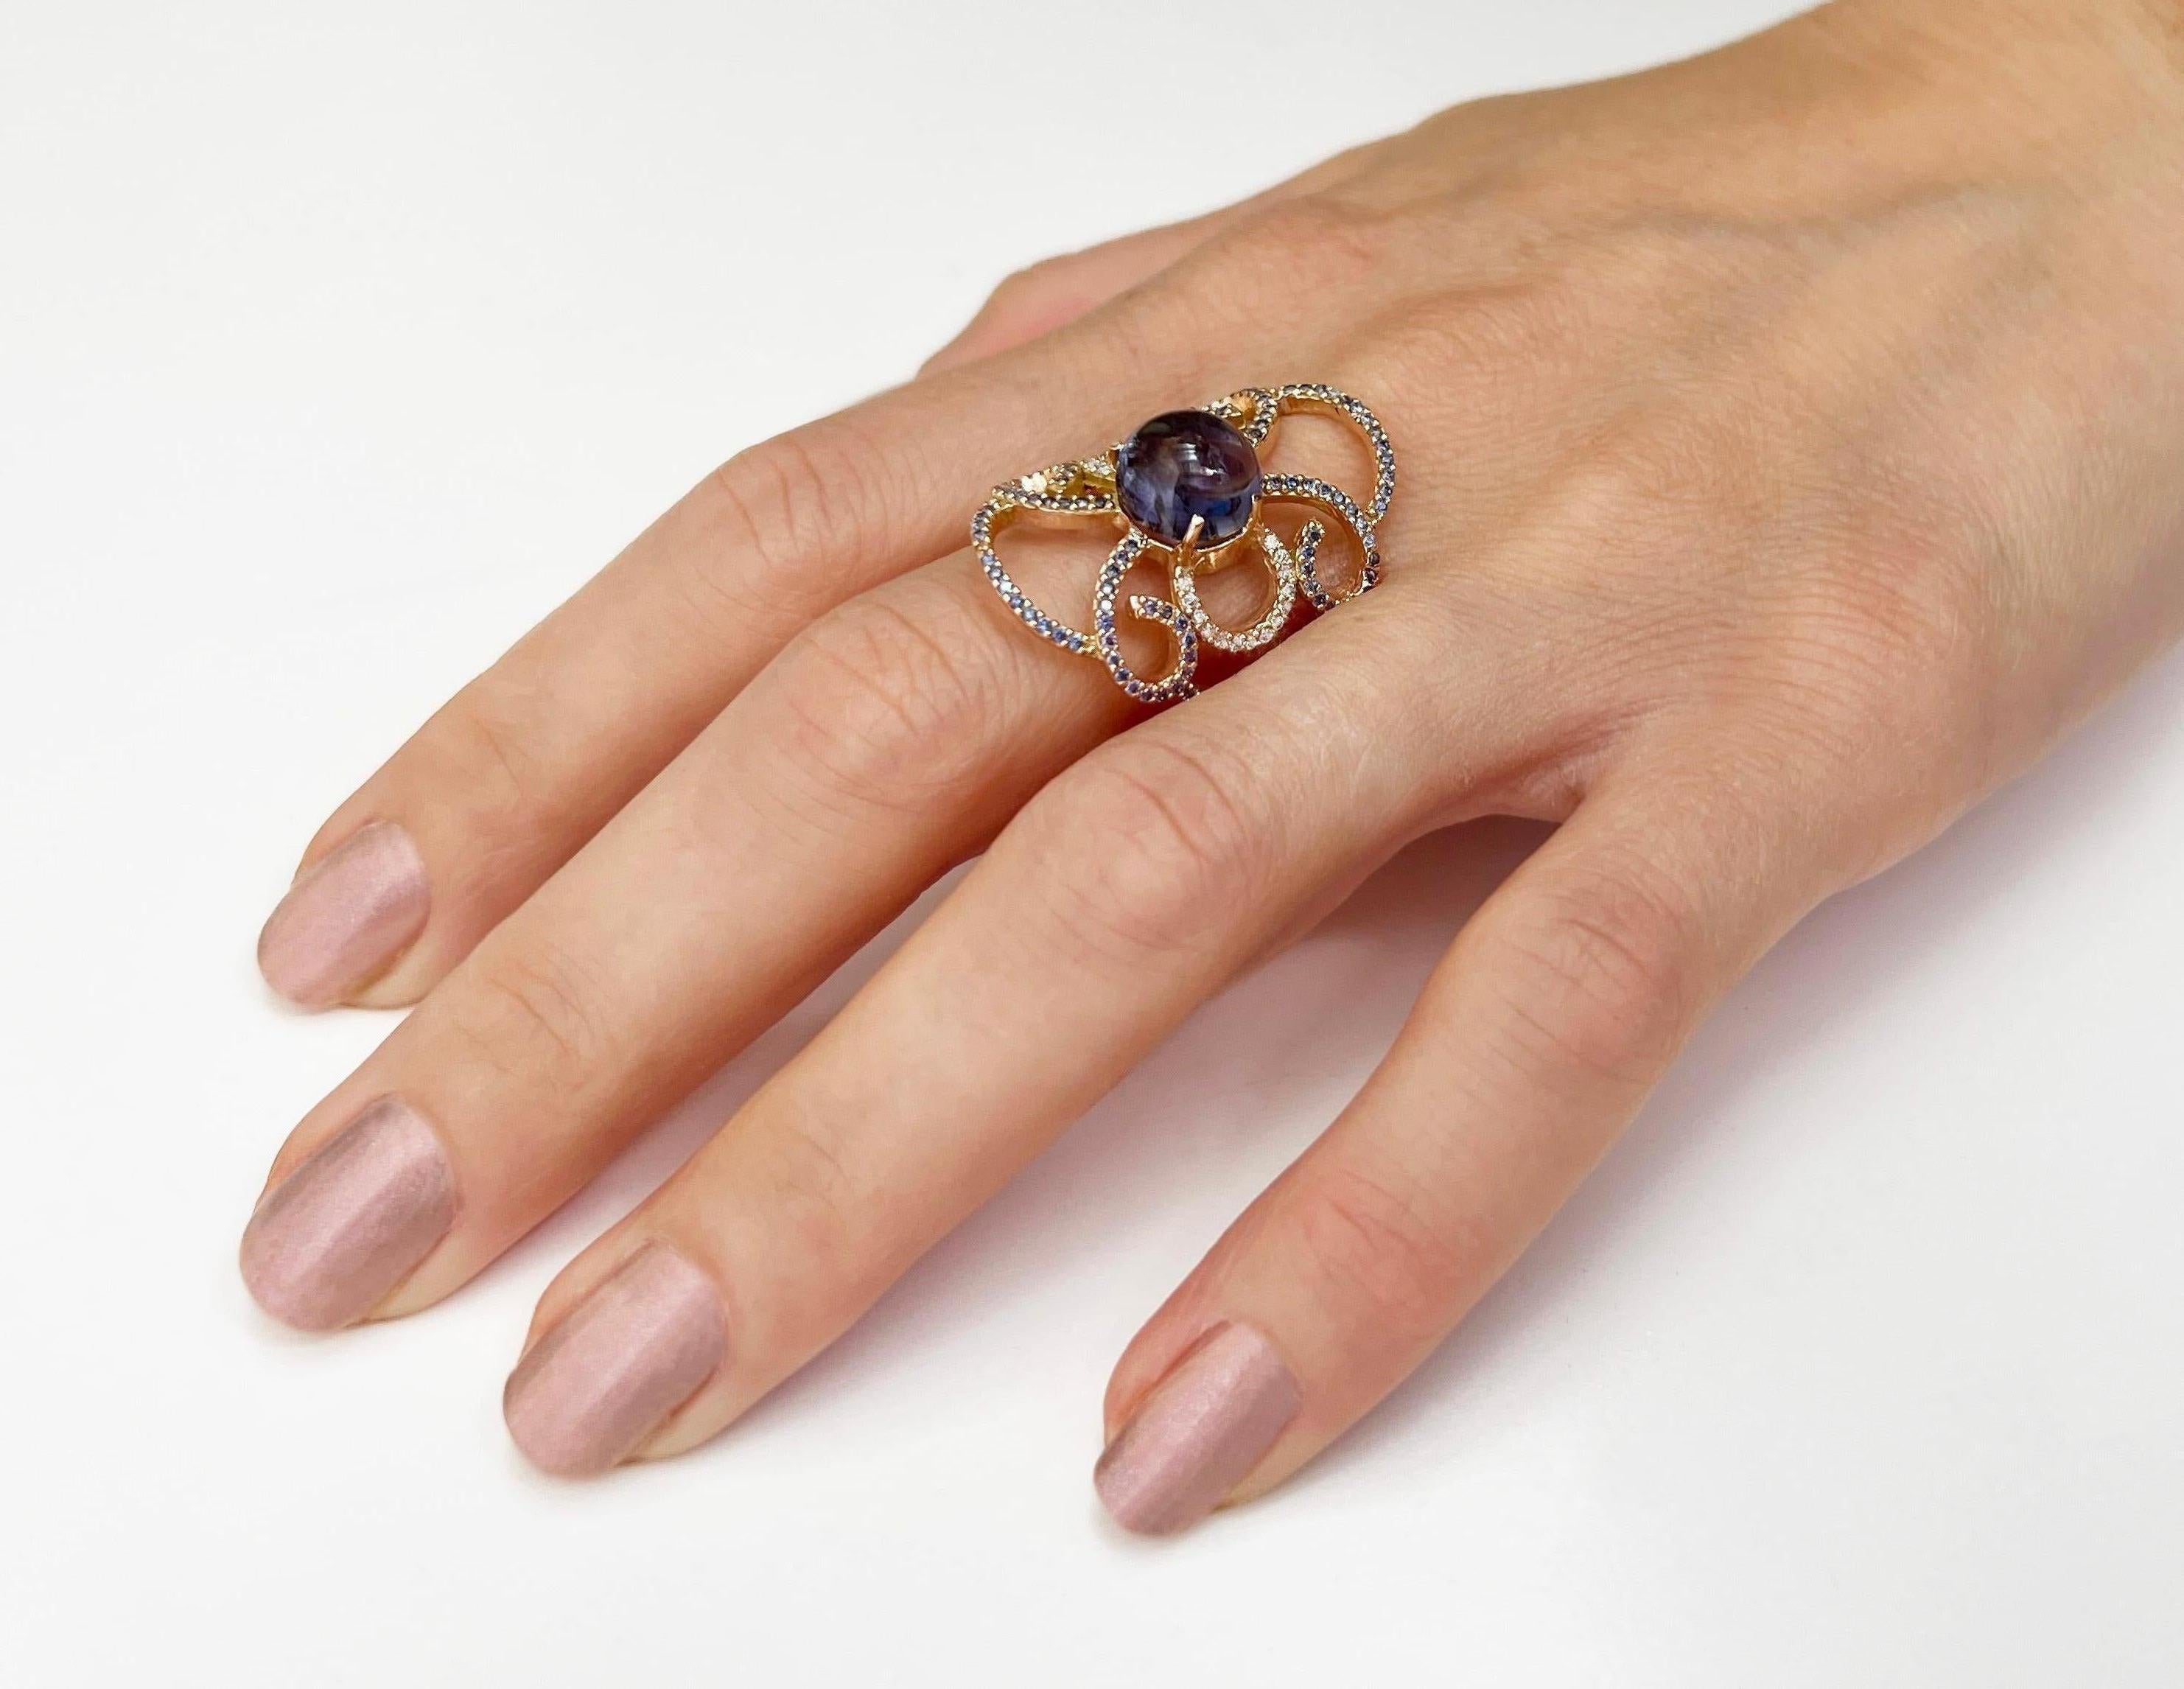 Inspired by curved shapes! Timeless beauty with modern elegance. Curved shapes that caresses your hand, special and unique design.
Made in Italy by Stanoppi Jewellery since 1948

Ring in 14k rose gold with Iolite (round cabochon cut, size: 10 mm),